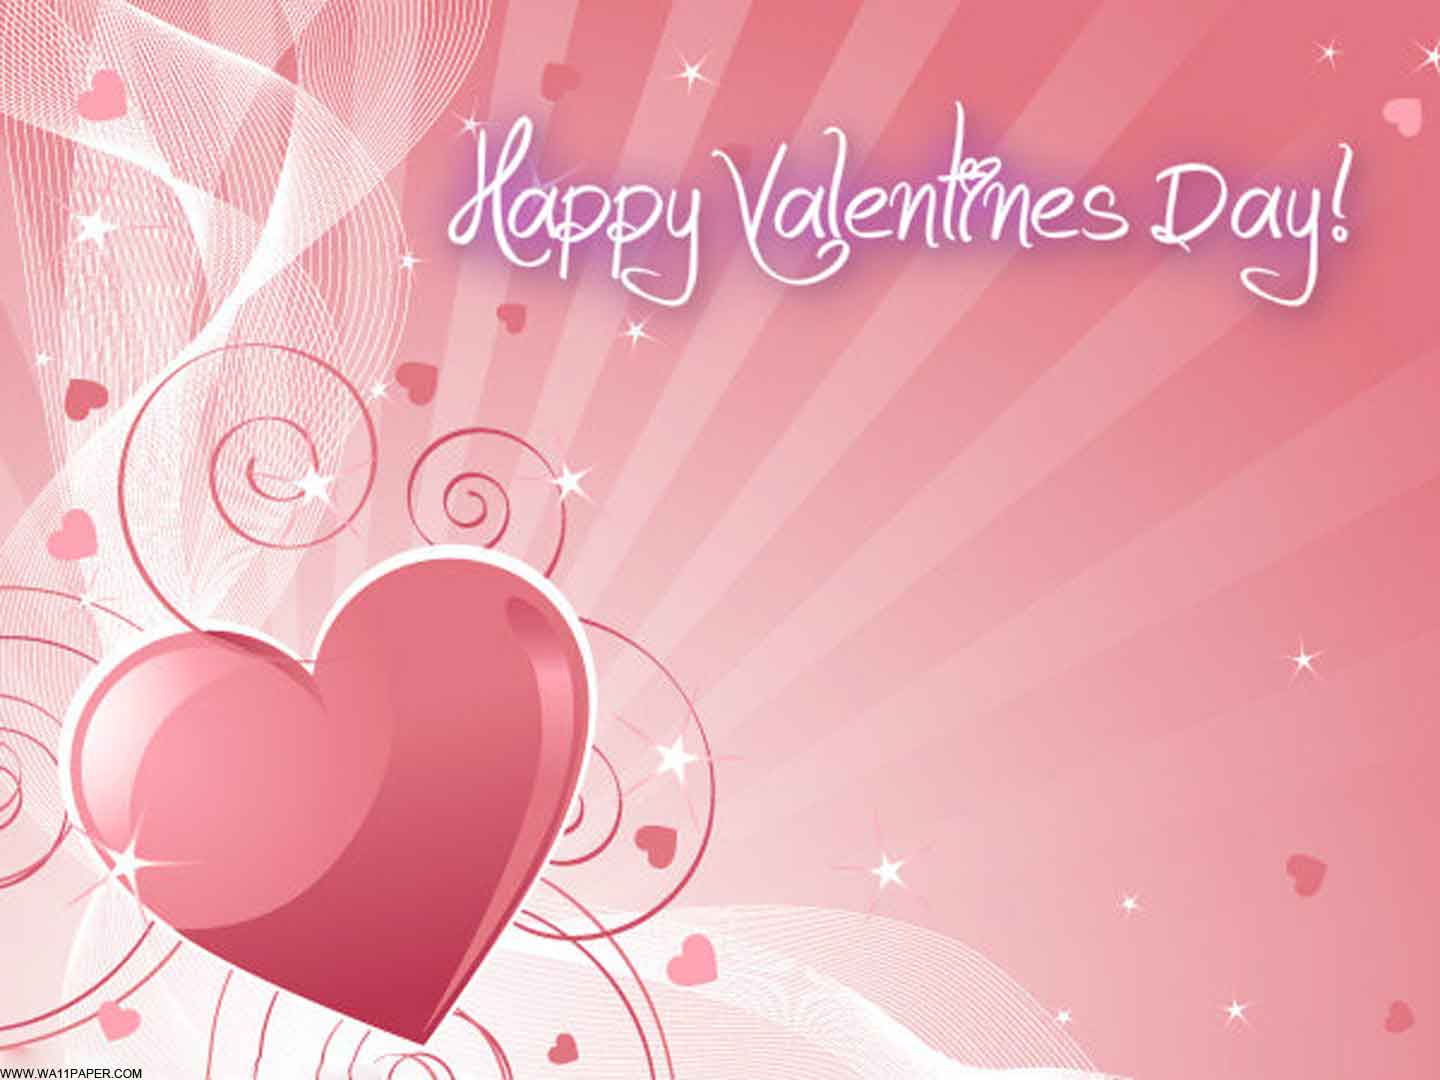 Happy Valentines Day Pictures Free Download